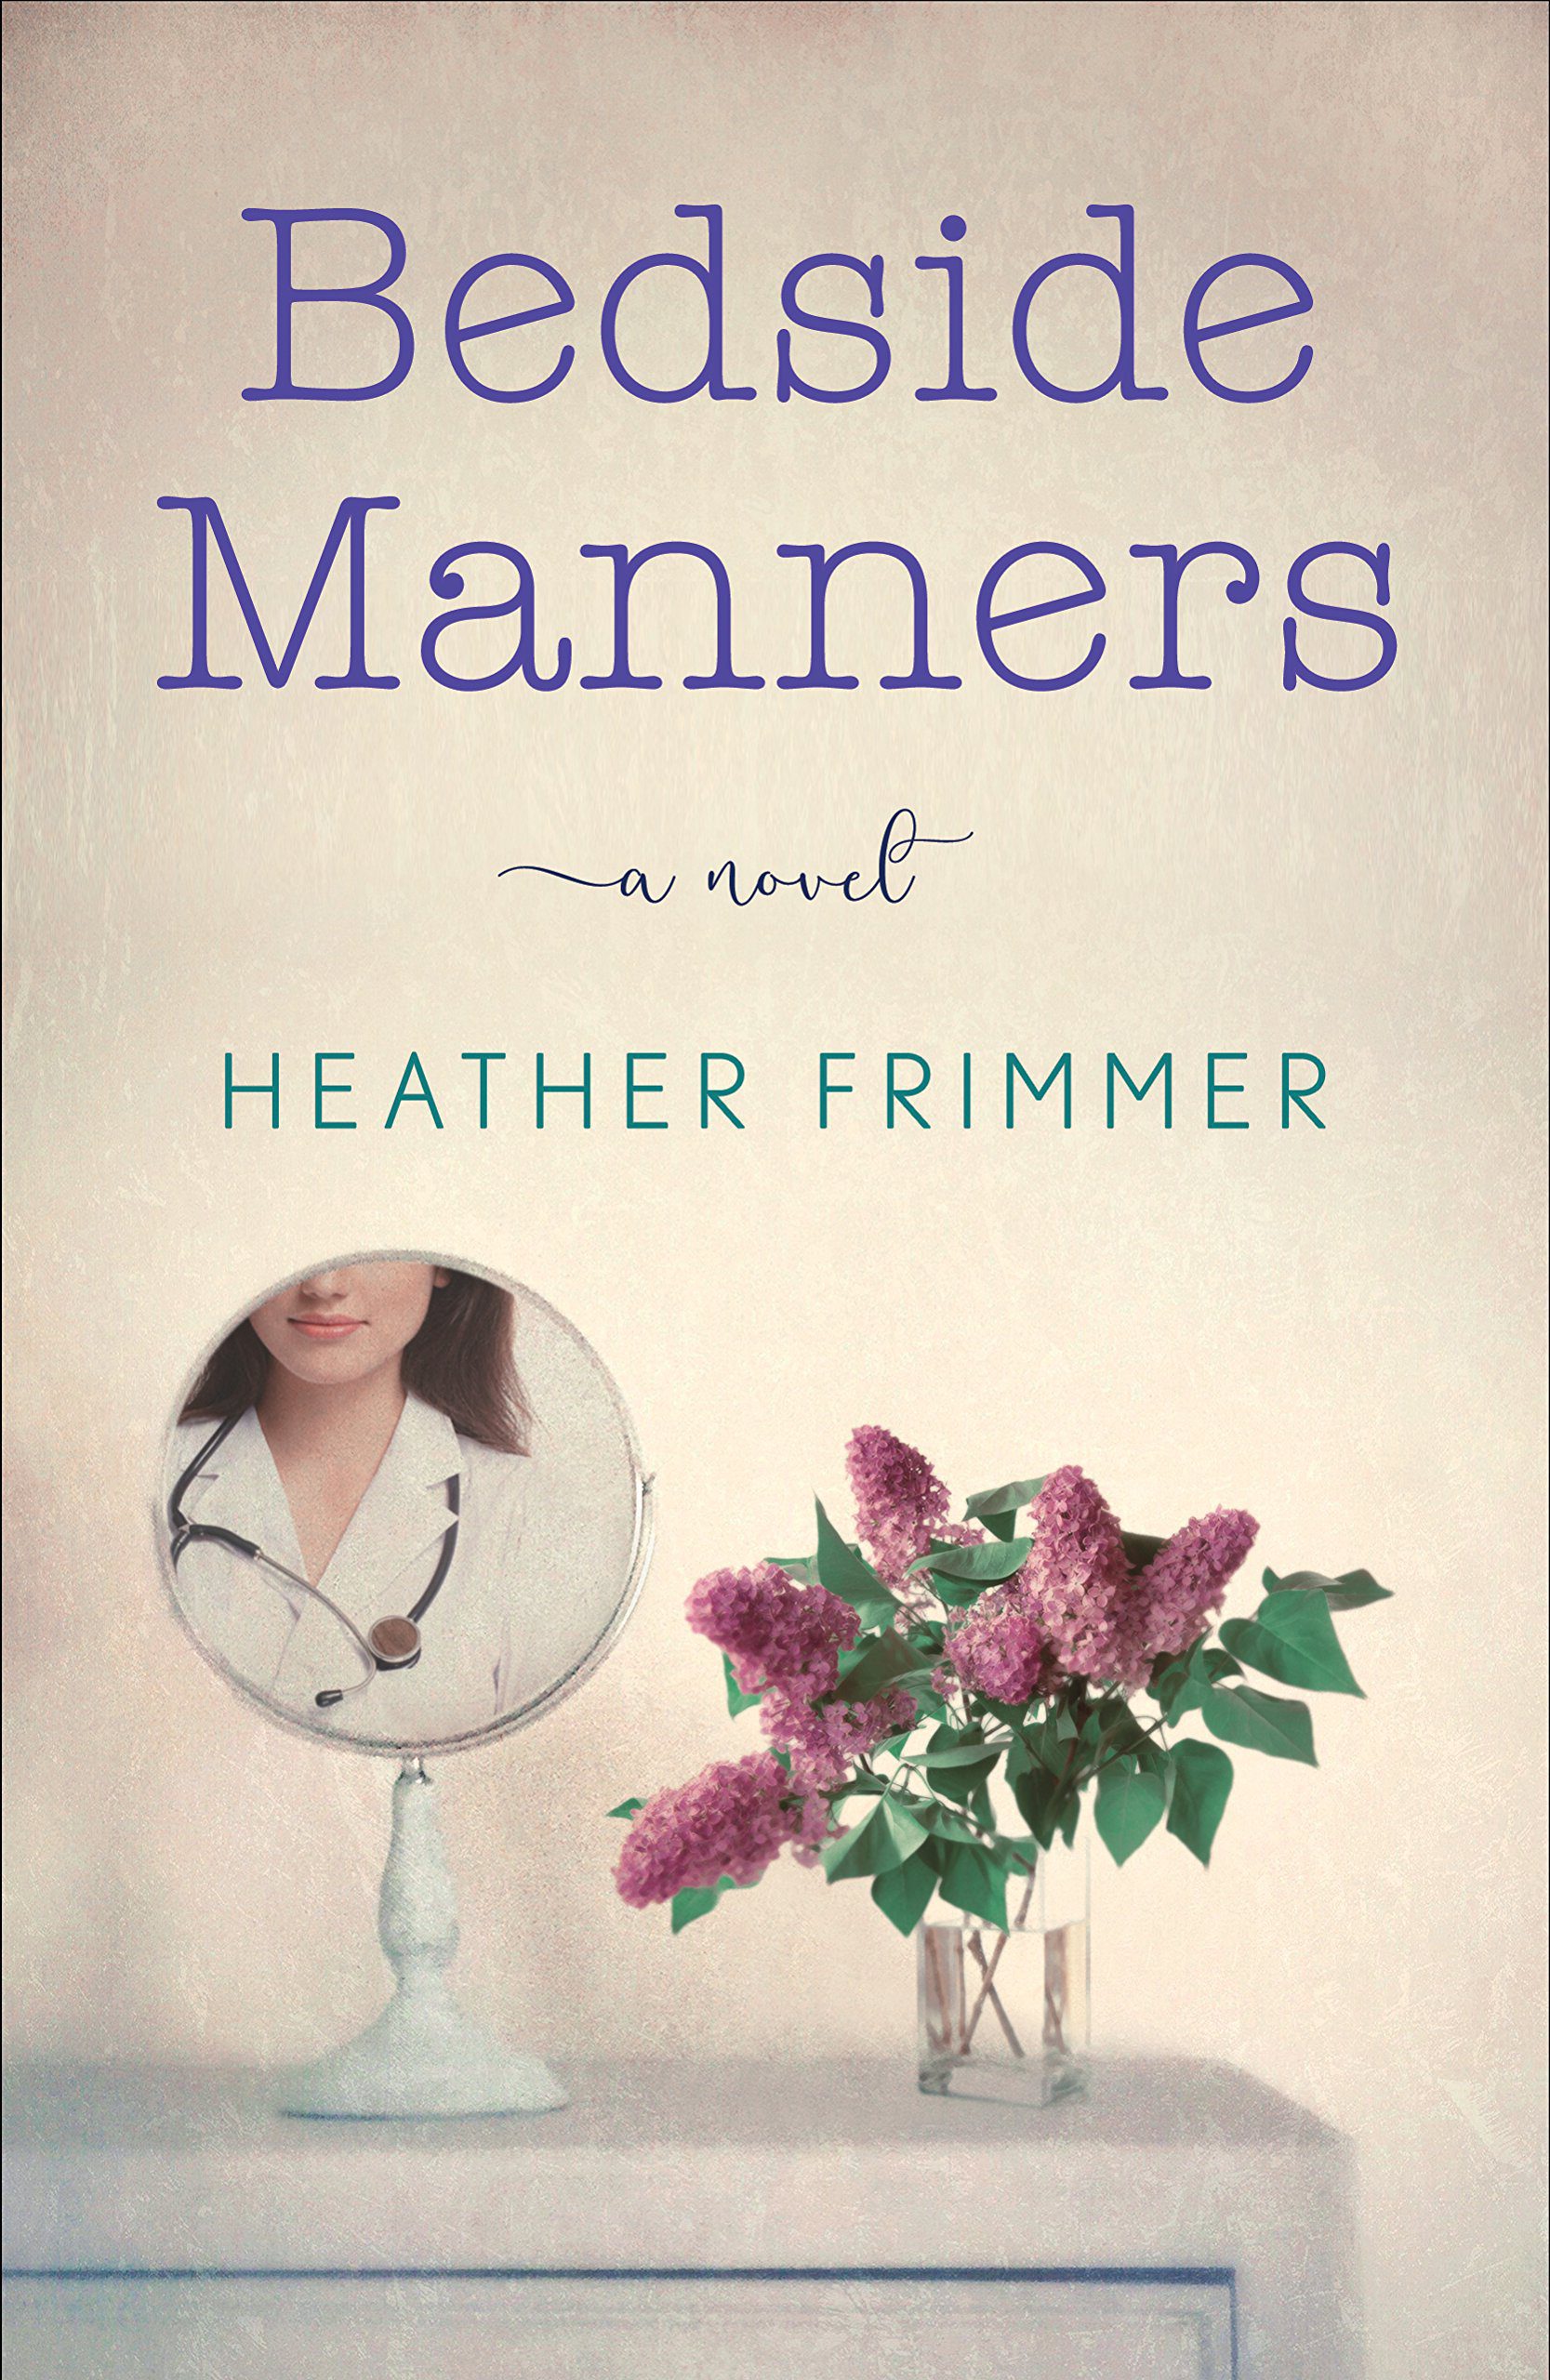 Meet Heather Frimmer Author of Bedside Manners